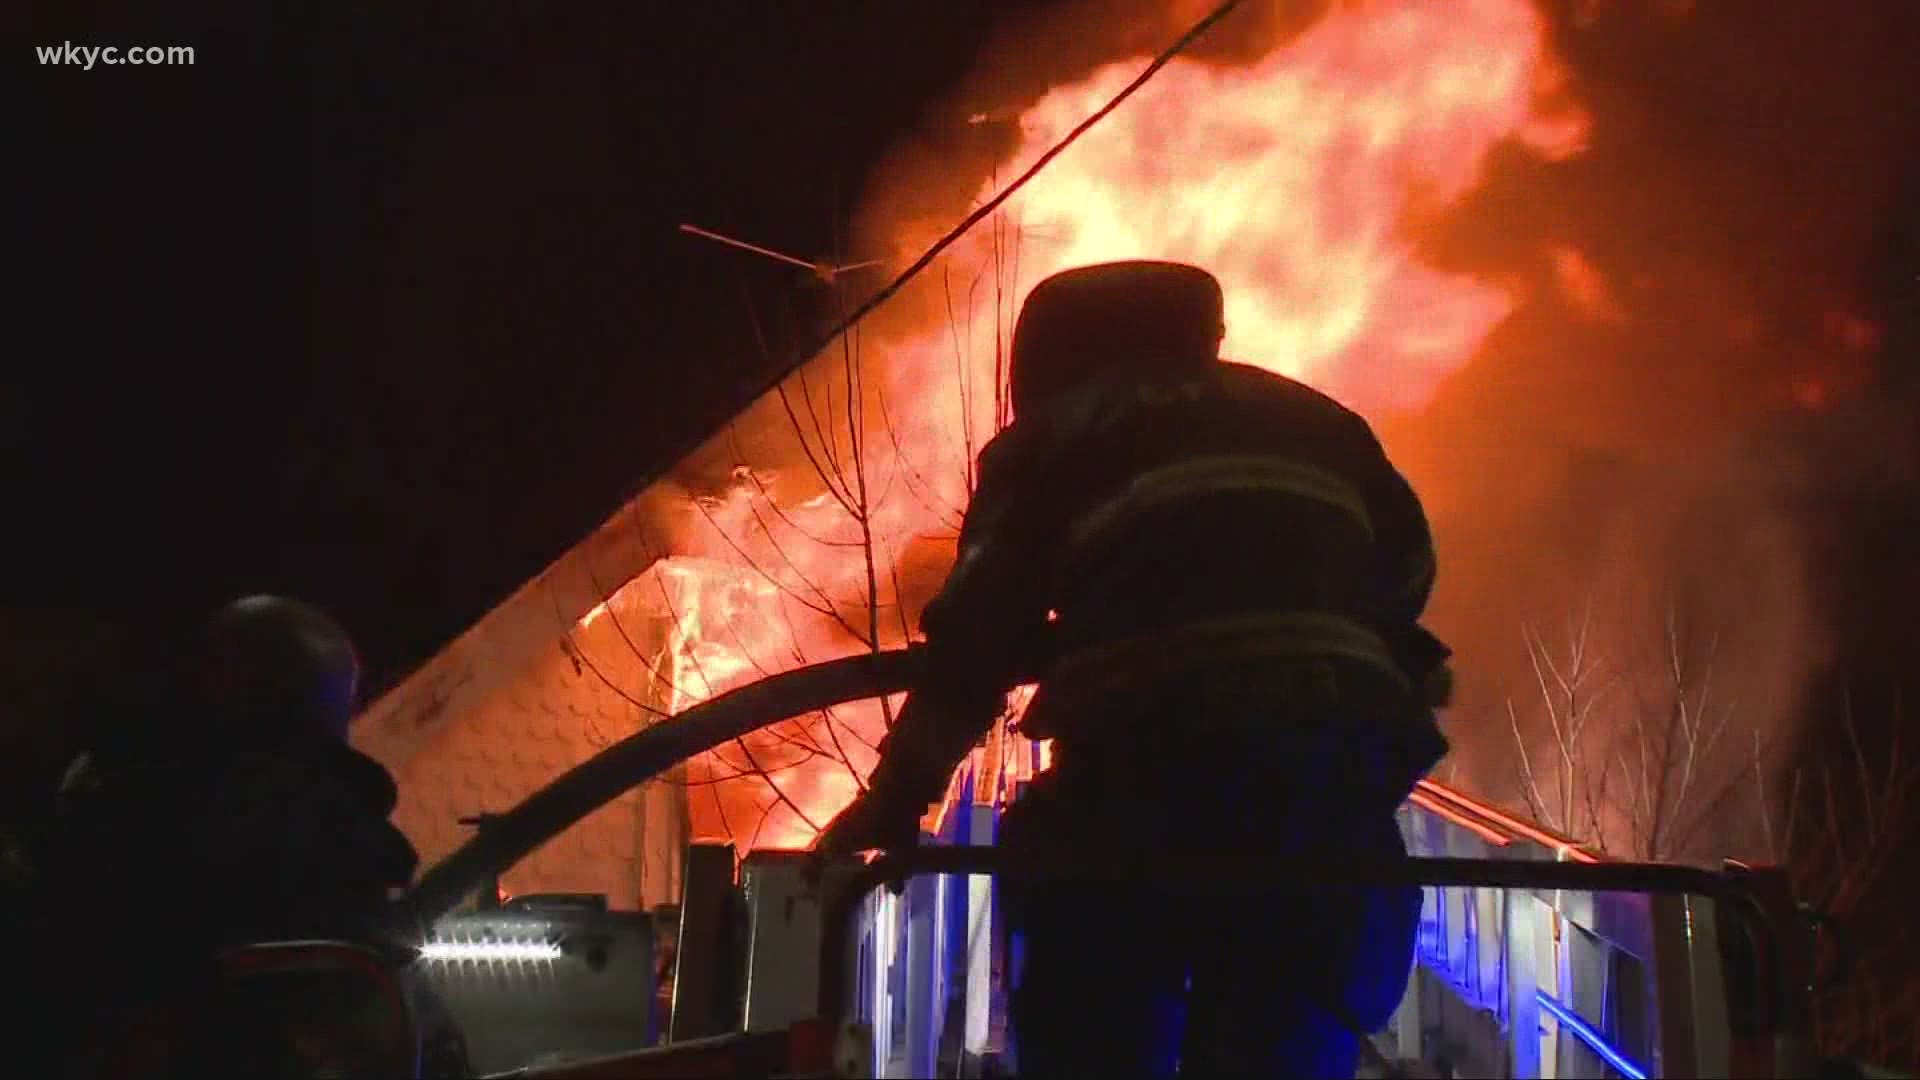 Officials say the fire is now under control. 3News was able to get live footage from the scene.